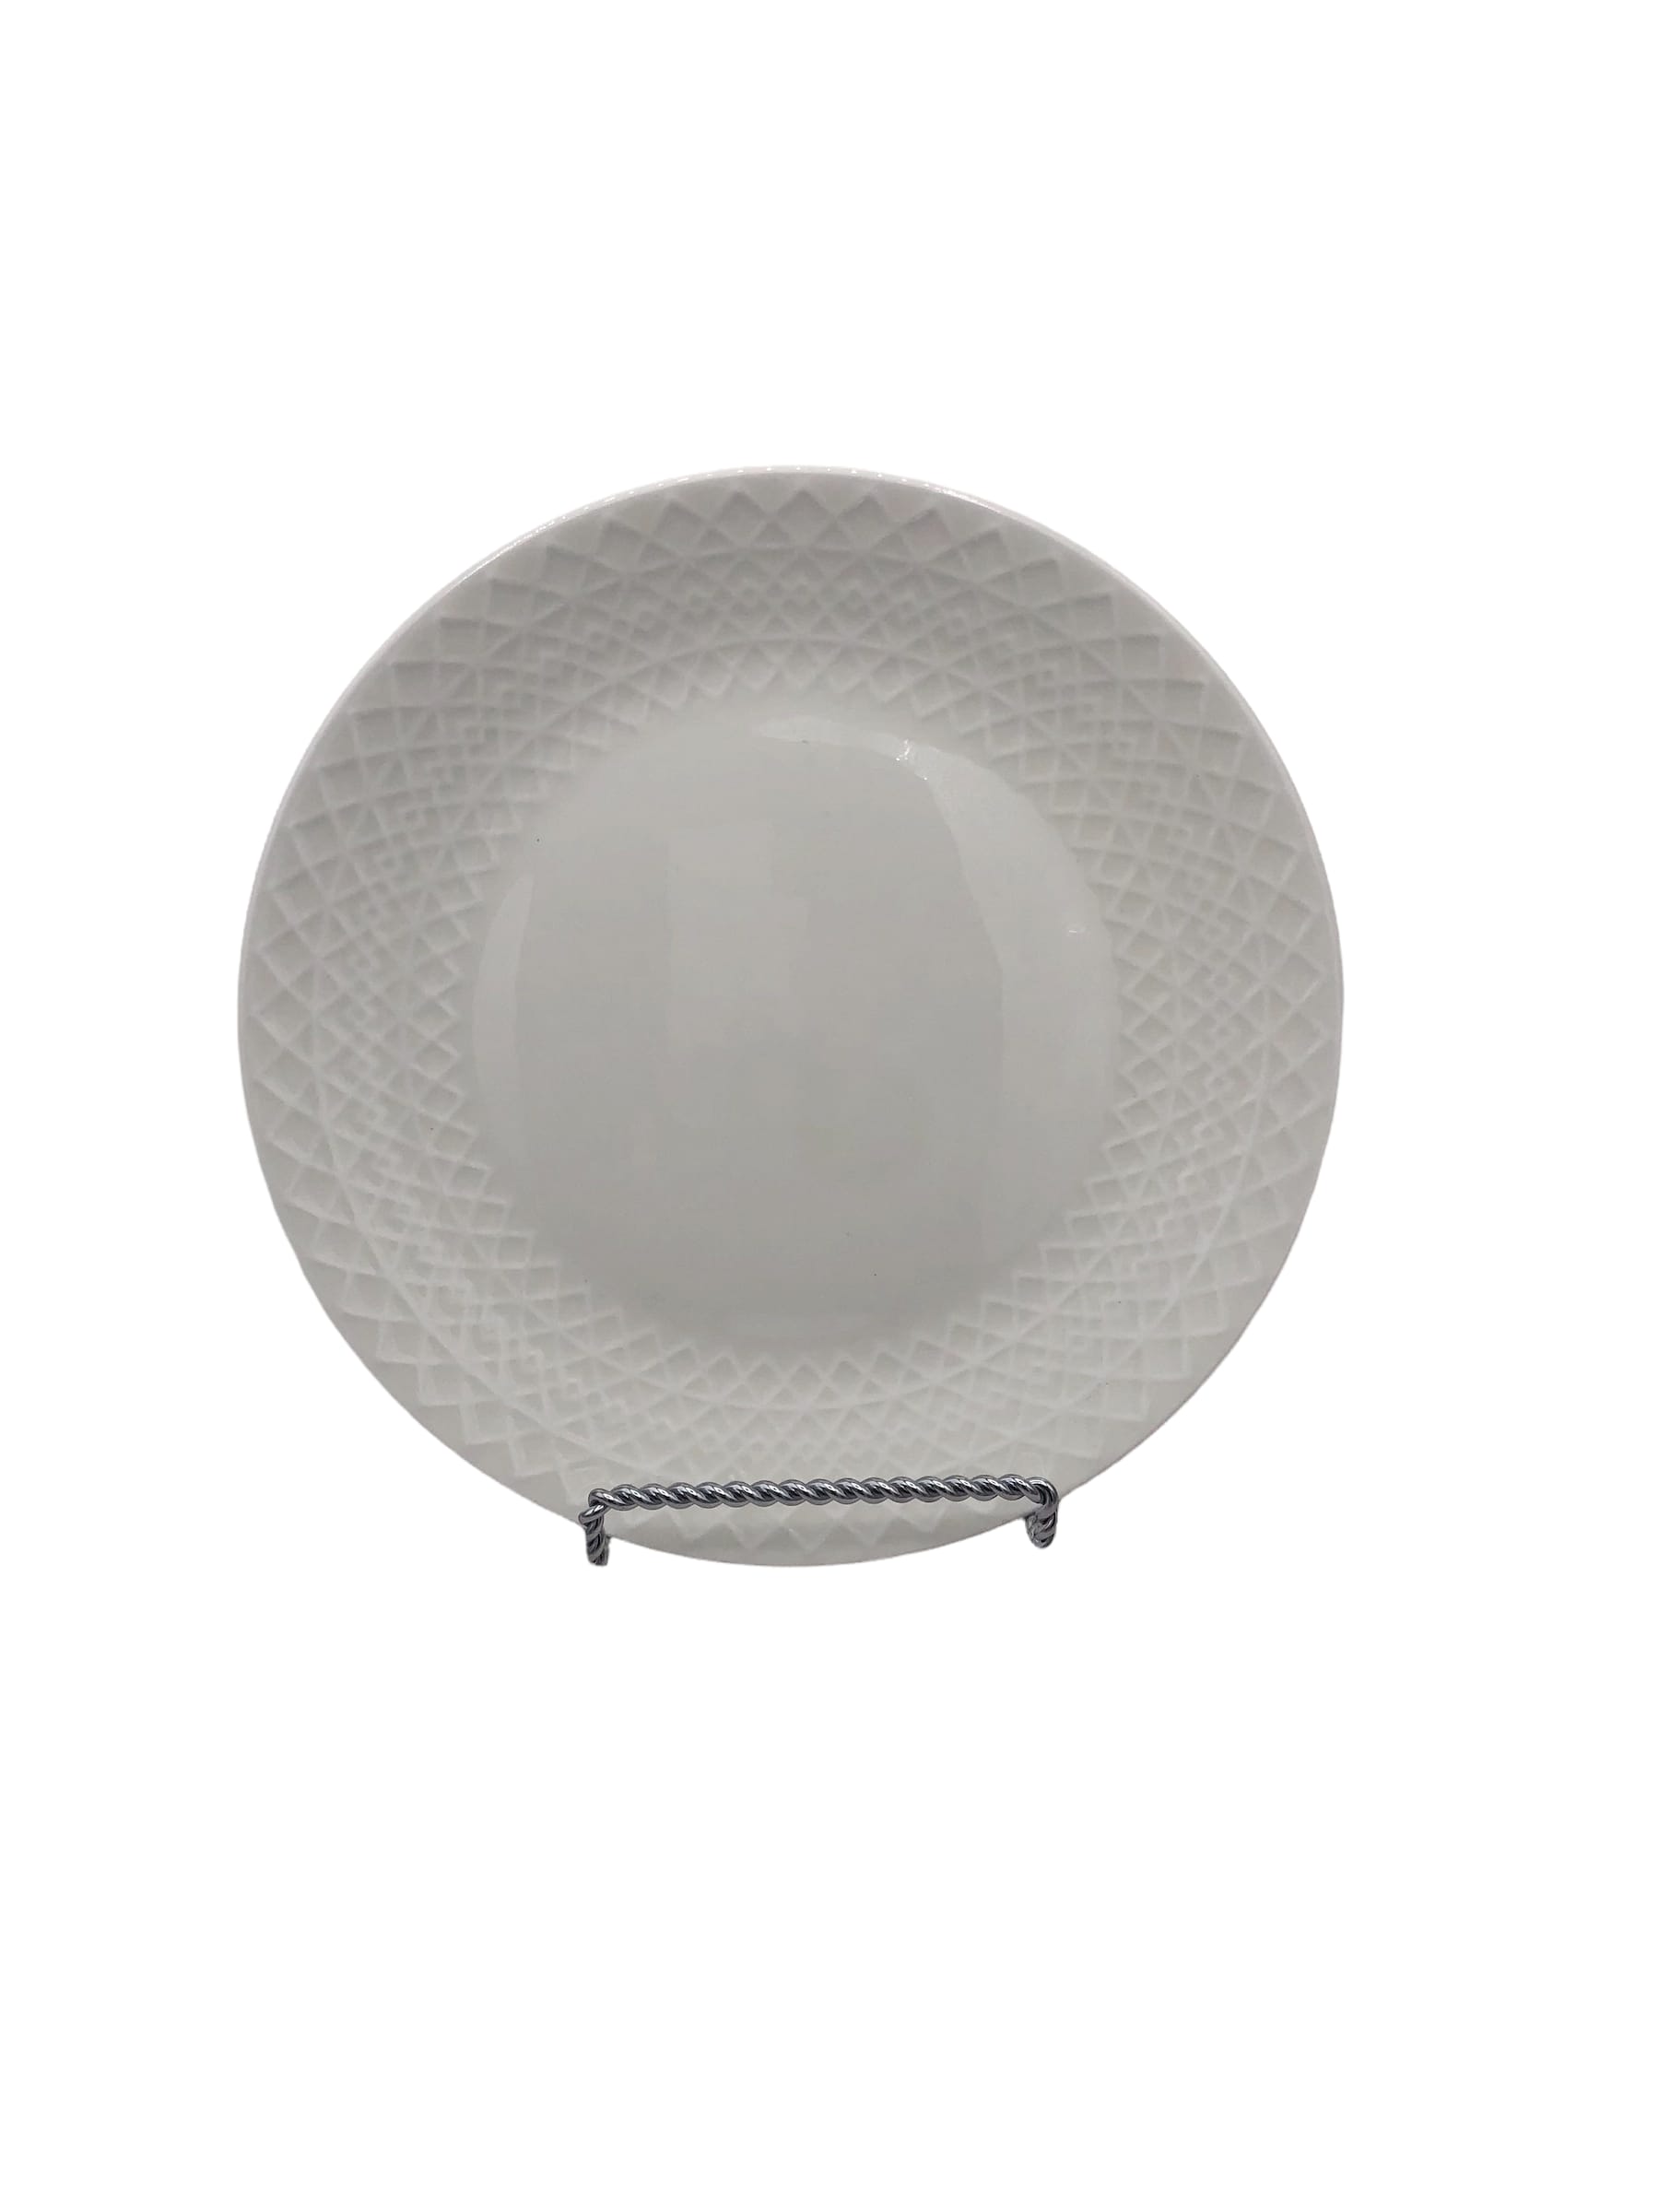 have more items to this set Mikasa Chatelet SALAD PLATE 1 of 12 available 